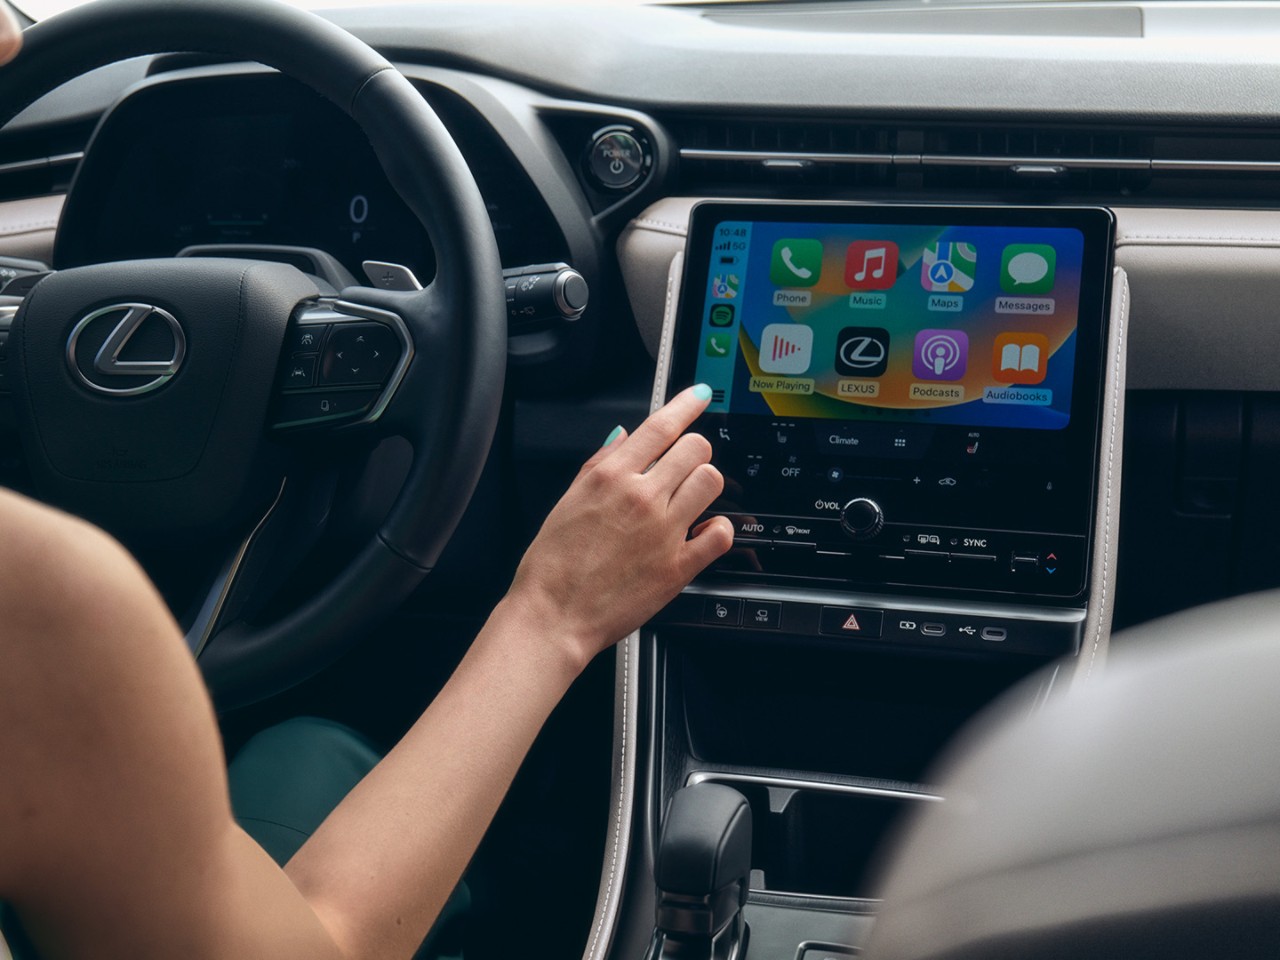 2024-discover-lexus-technology-connectivity-stay-connected-1440x1080-270926